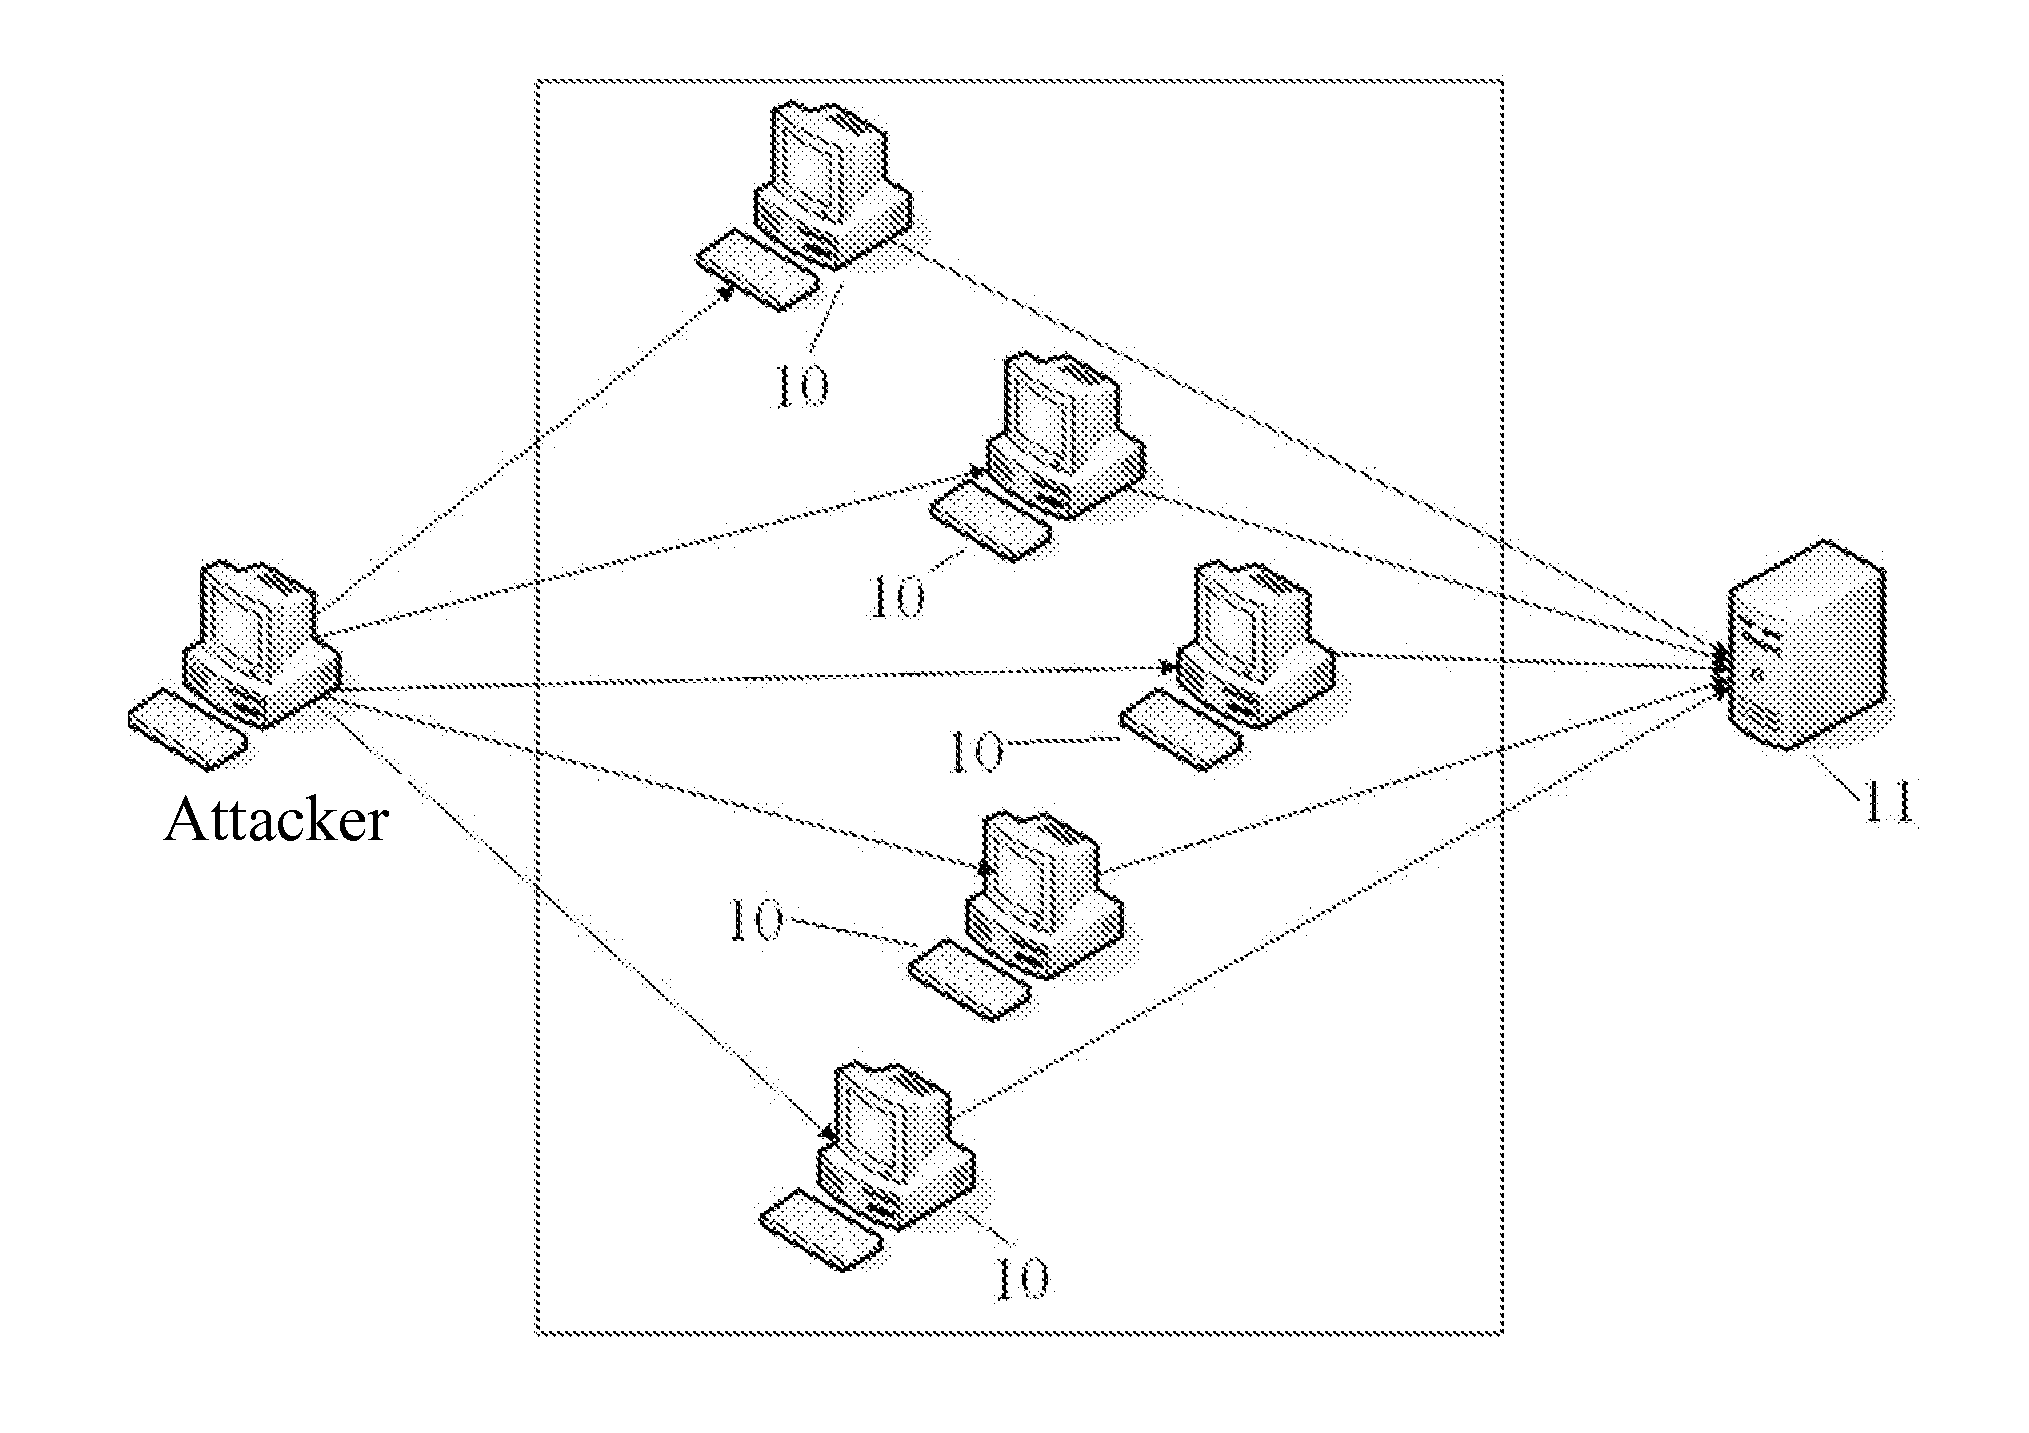 Method and apparatus for detecting and defending against cc attack